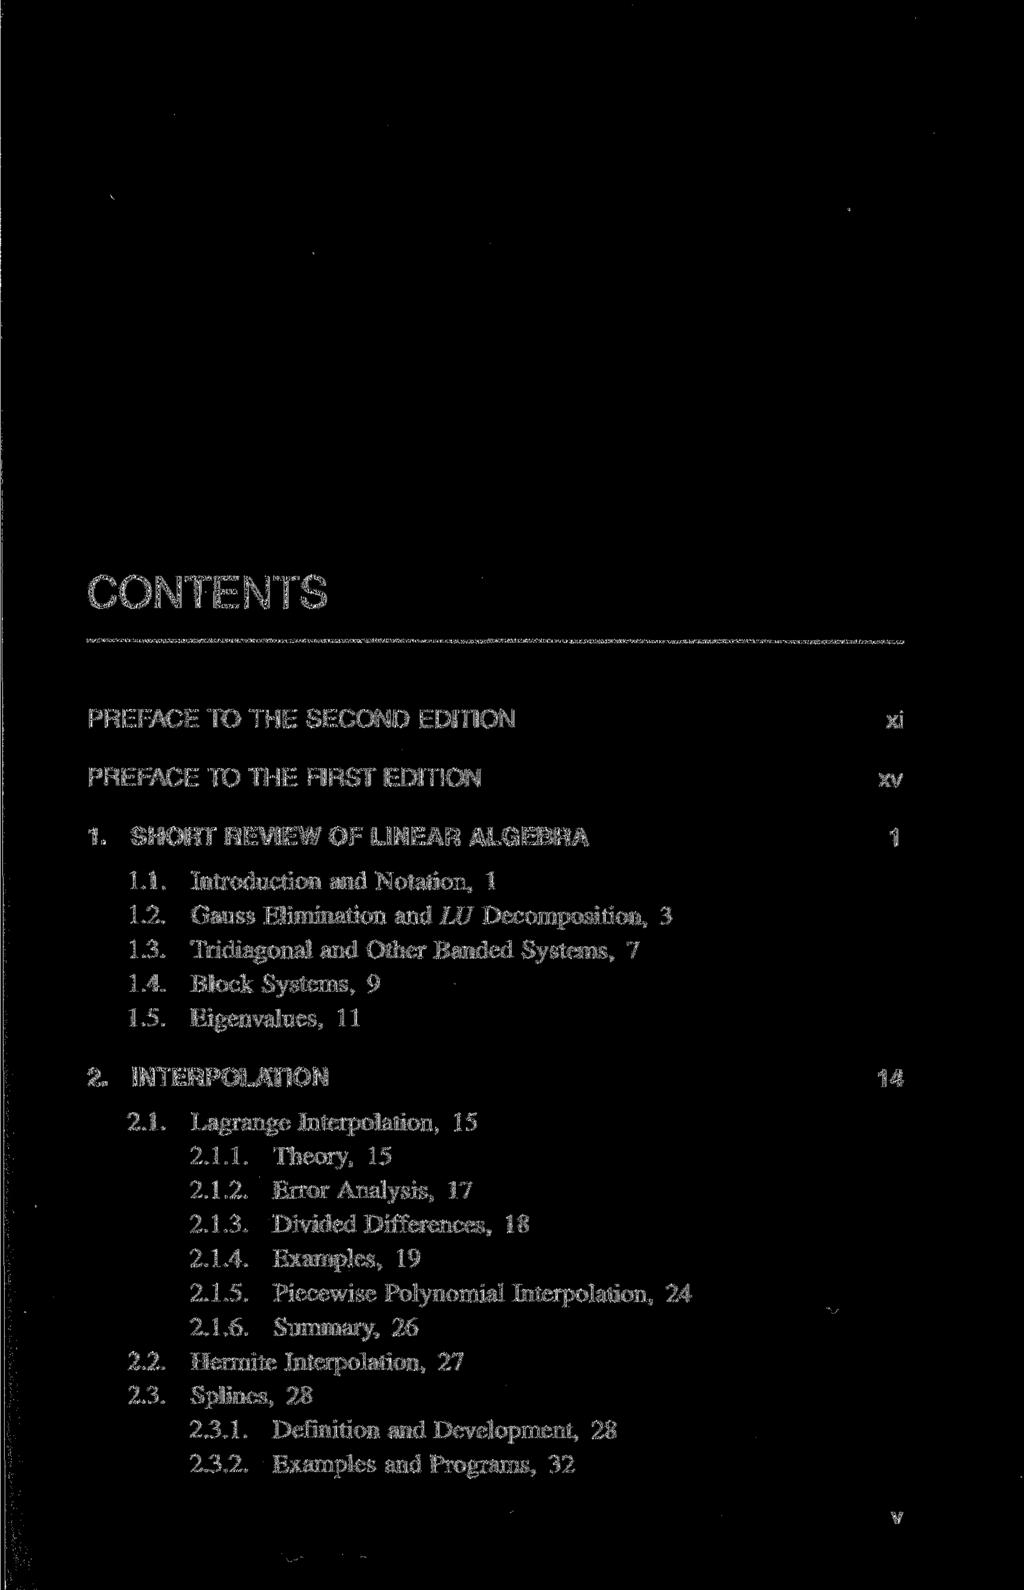 CONTENTS PREFACE TO THE SECOND EDITION PREFACE TO THE FIRST EDITION xi xv 1. SHORT REVIEW OF LINEAR ALGEBRA 1 1.1. Introduction and Notation, 1 1.2. Gauss Elimination and LU Decomposition, 3 